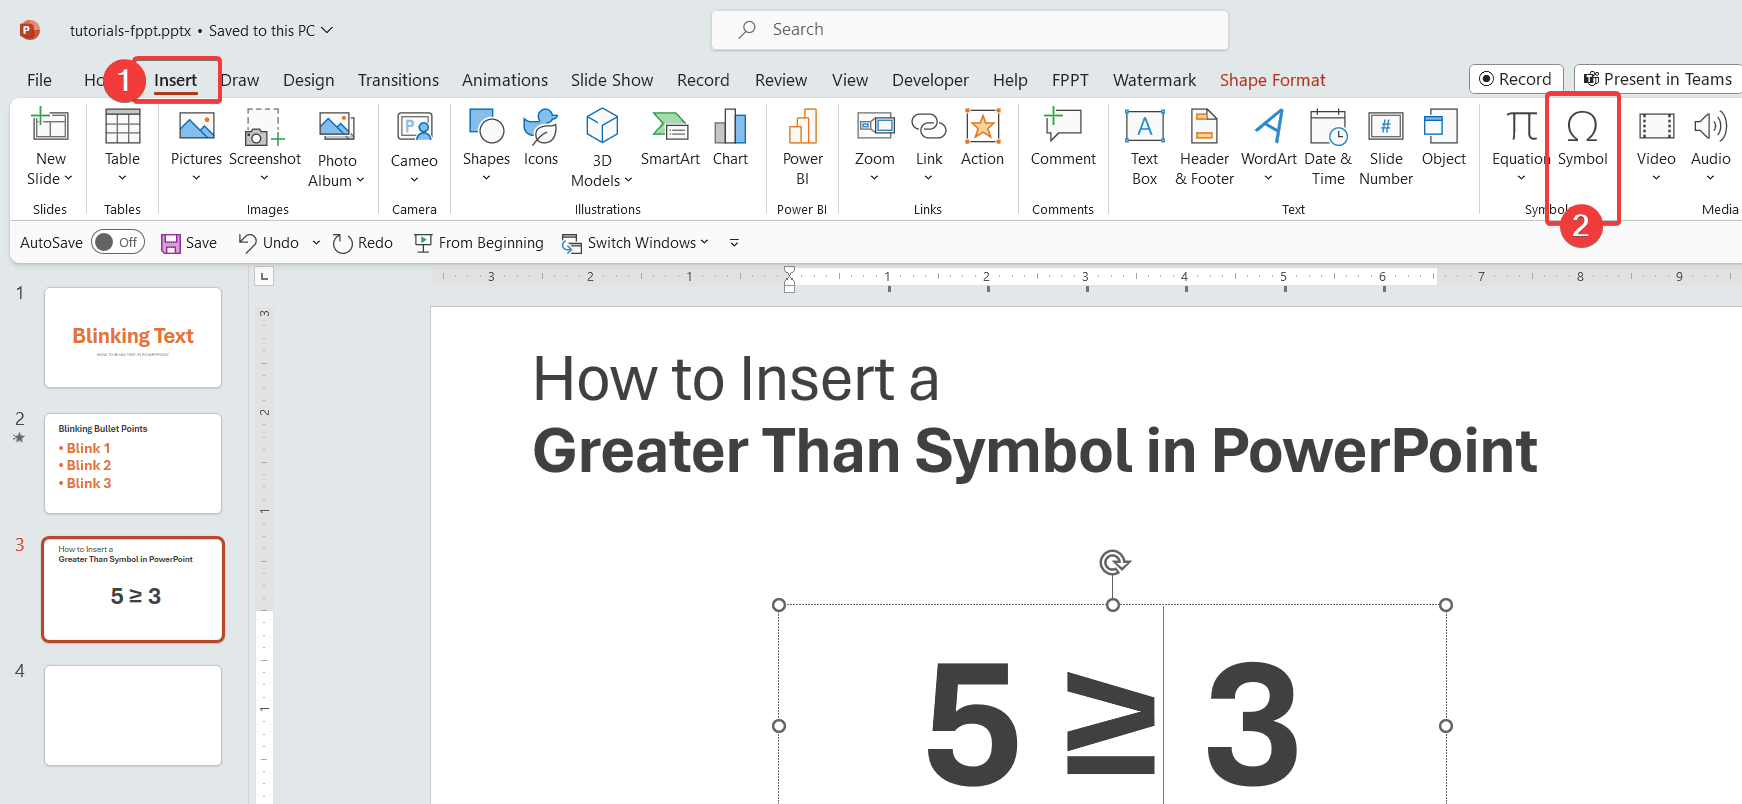 How to insert greater symbol in PowerPoint slide